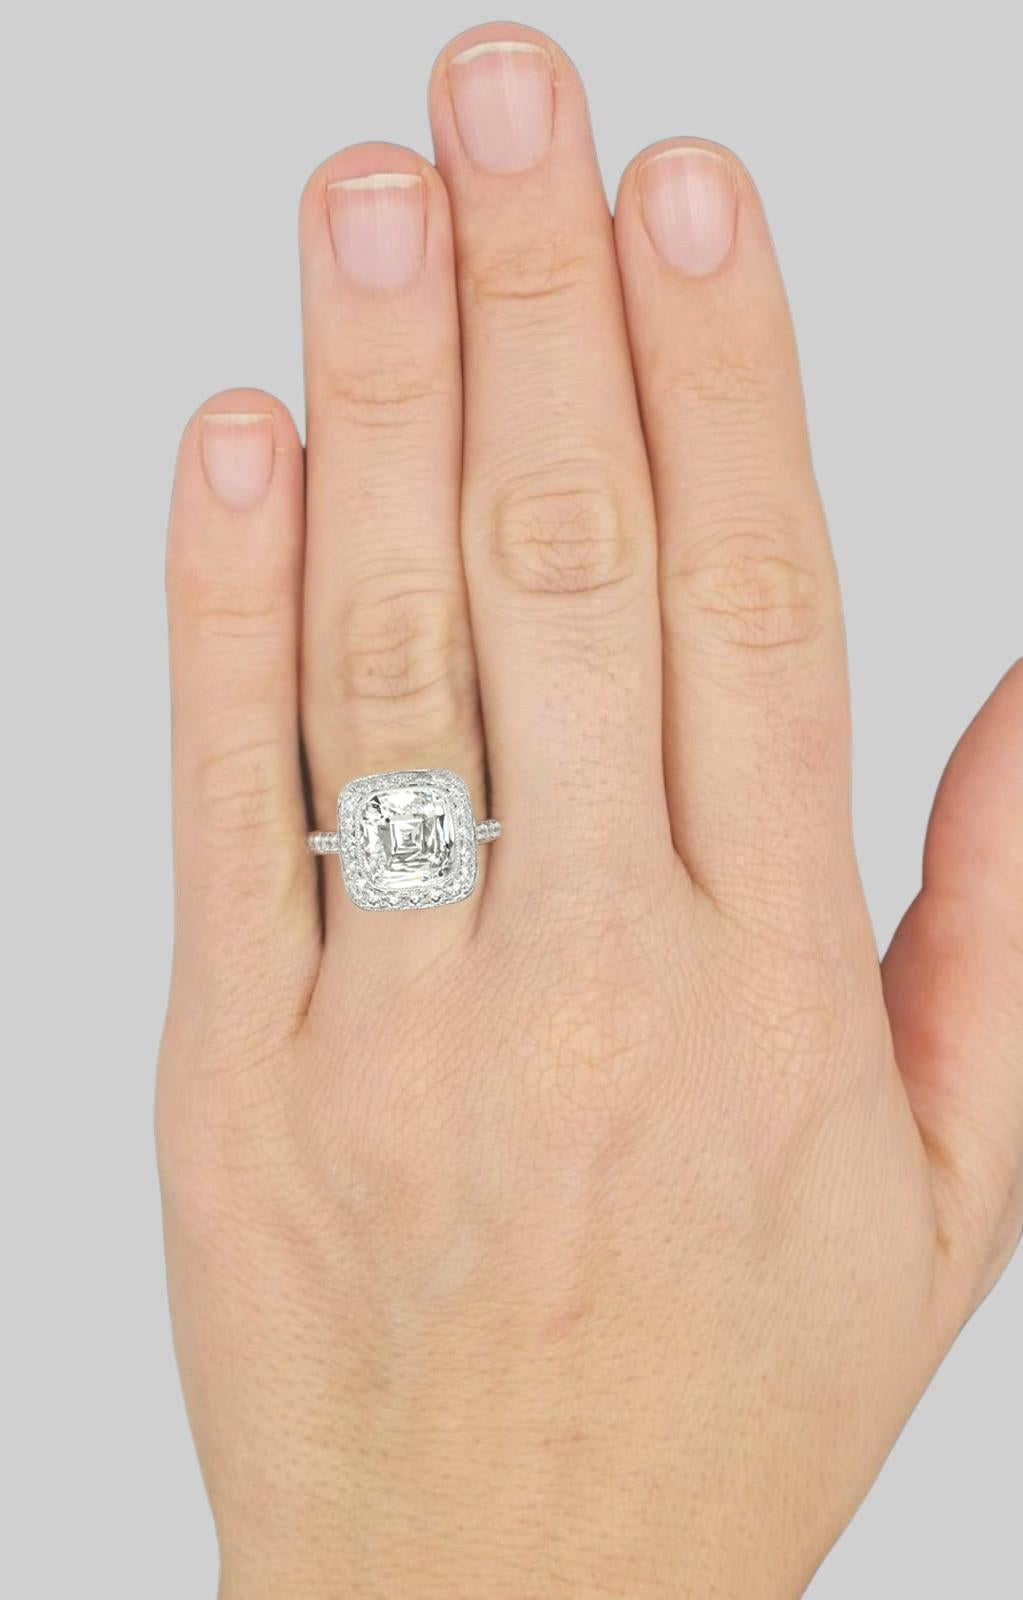 second hand engagement rings